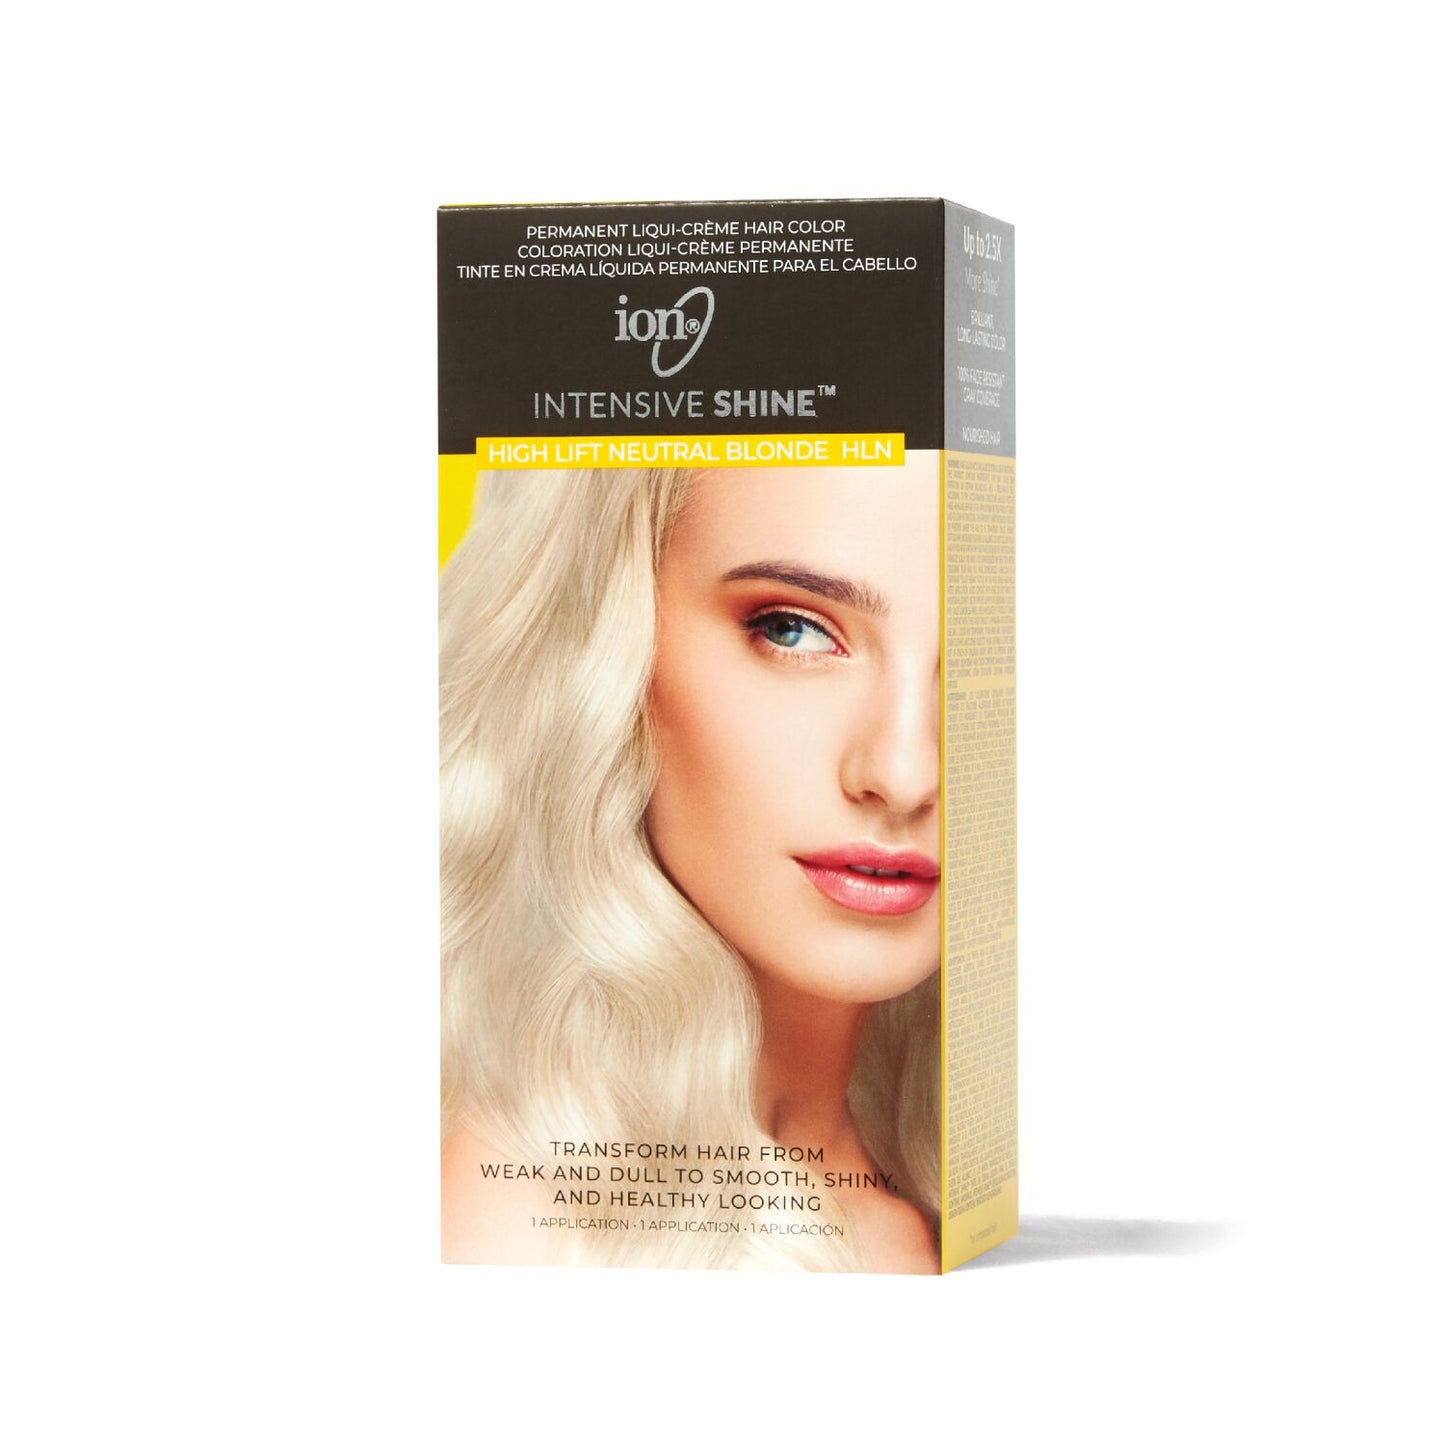 Intensive Shine  by   ion Intensive Shine Hair Color Kit High Lift Neutral Blonde HLN